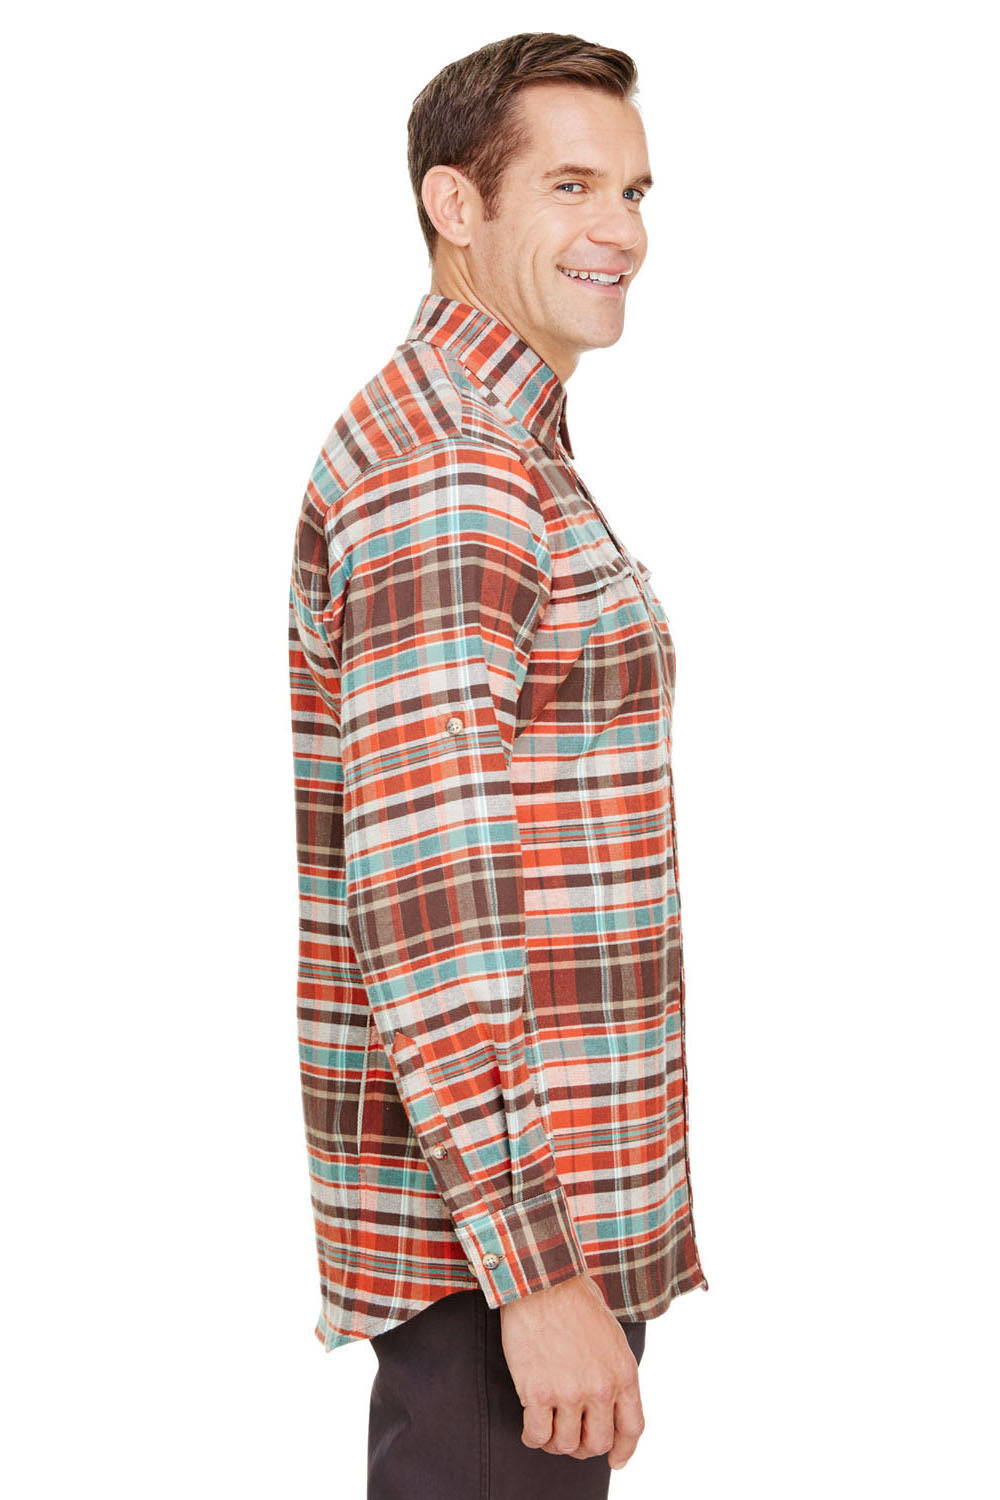 Backpacker BP7091 Mens Stretch Flannel Long Sleeve Button Down Shirt w/ Double Pockets Rust Red Side